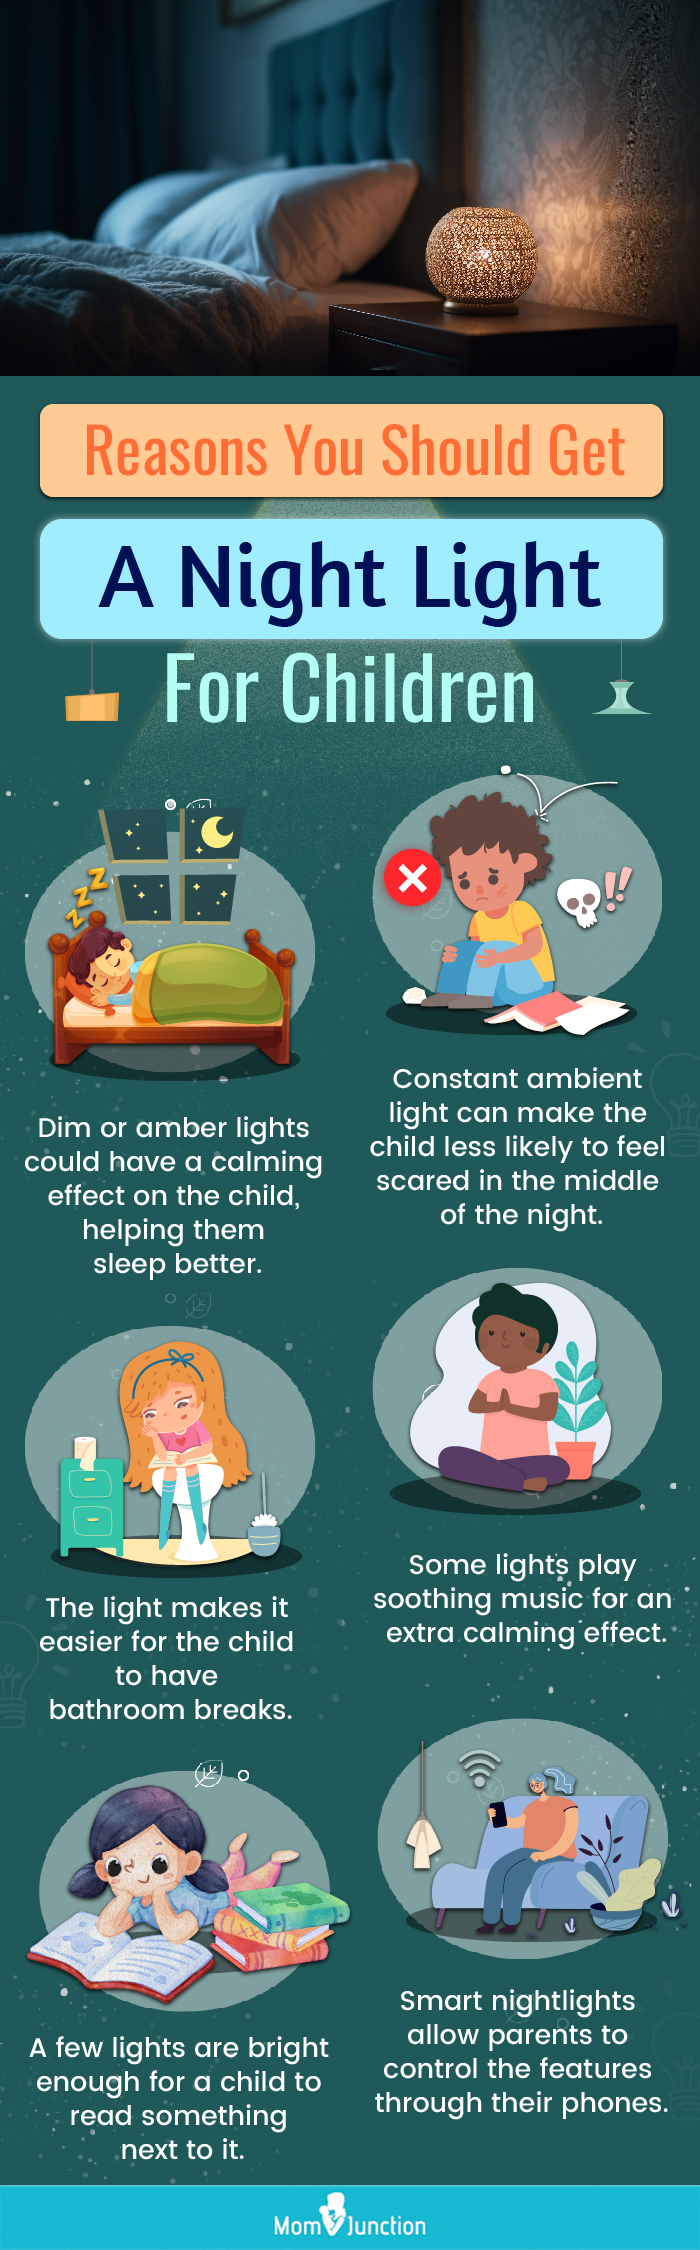 Reasons You Should Get A Night Light For Children (infographic)